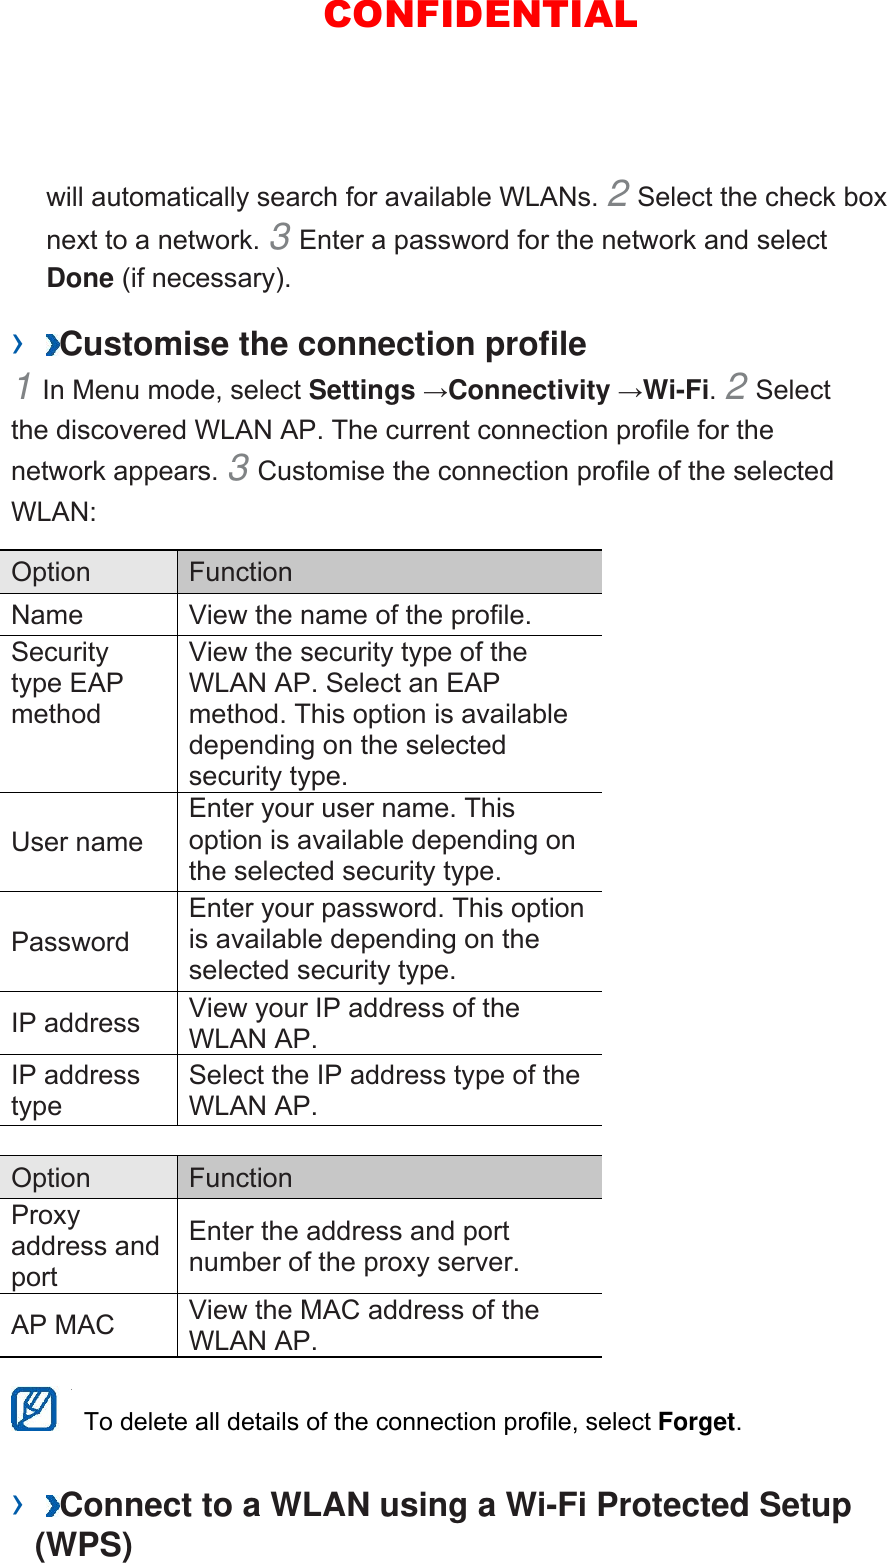 will automatically search for available WLANs. 2 Select the check box next to a network. 3 Enter a password for the network and select Done (if necessary).   ›  Customise the connection profile   1 In Menu mode, select Settings →Connectivity →Wi-Fi. 2 Select the discovered WLAN AP. The current connection profile for the network appears. 3 Customise the connection profile of the selected WLAN:  Option   Function  Name    View the name of the profile.   Security type EAP method  View the security type of the WLAN AP. Select an EAP method. This option is available depending on the selected security type.   User name   Enter your user name. This option is available depending on the selected security type.   Password  Enter your password. This option is available depending on the selected security type.   IP address    View your IP address of the WLAN AP.   IP address type  Select the IP address type of the WLAN AP.    Option   Function  Proxy address and port  Enter the address and port number of the proxy server.   AP MAC    View the MAC address of the WLAN AP.      To delete all details of the connection profile, select Forget.  ›  Connect to a WLAN using a Wi-Fi Protected Setup (WPS)   CONFIDENTIAL